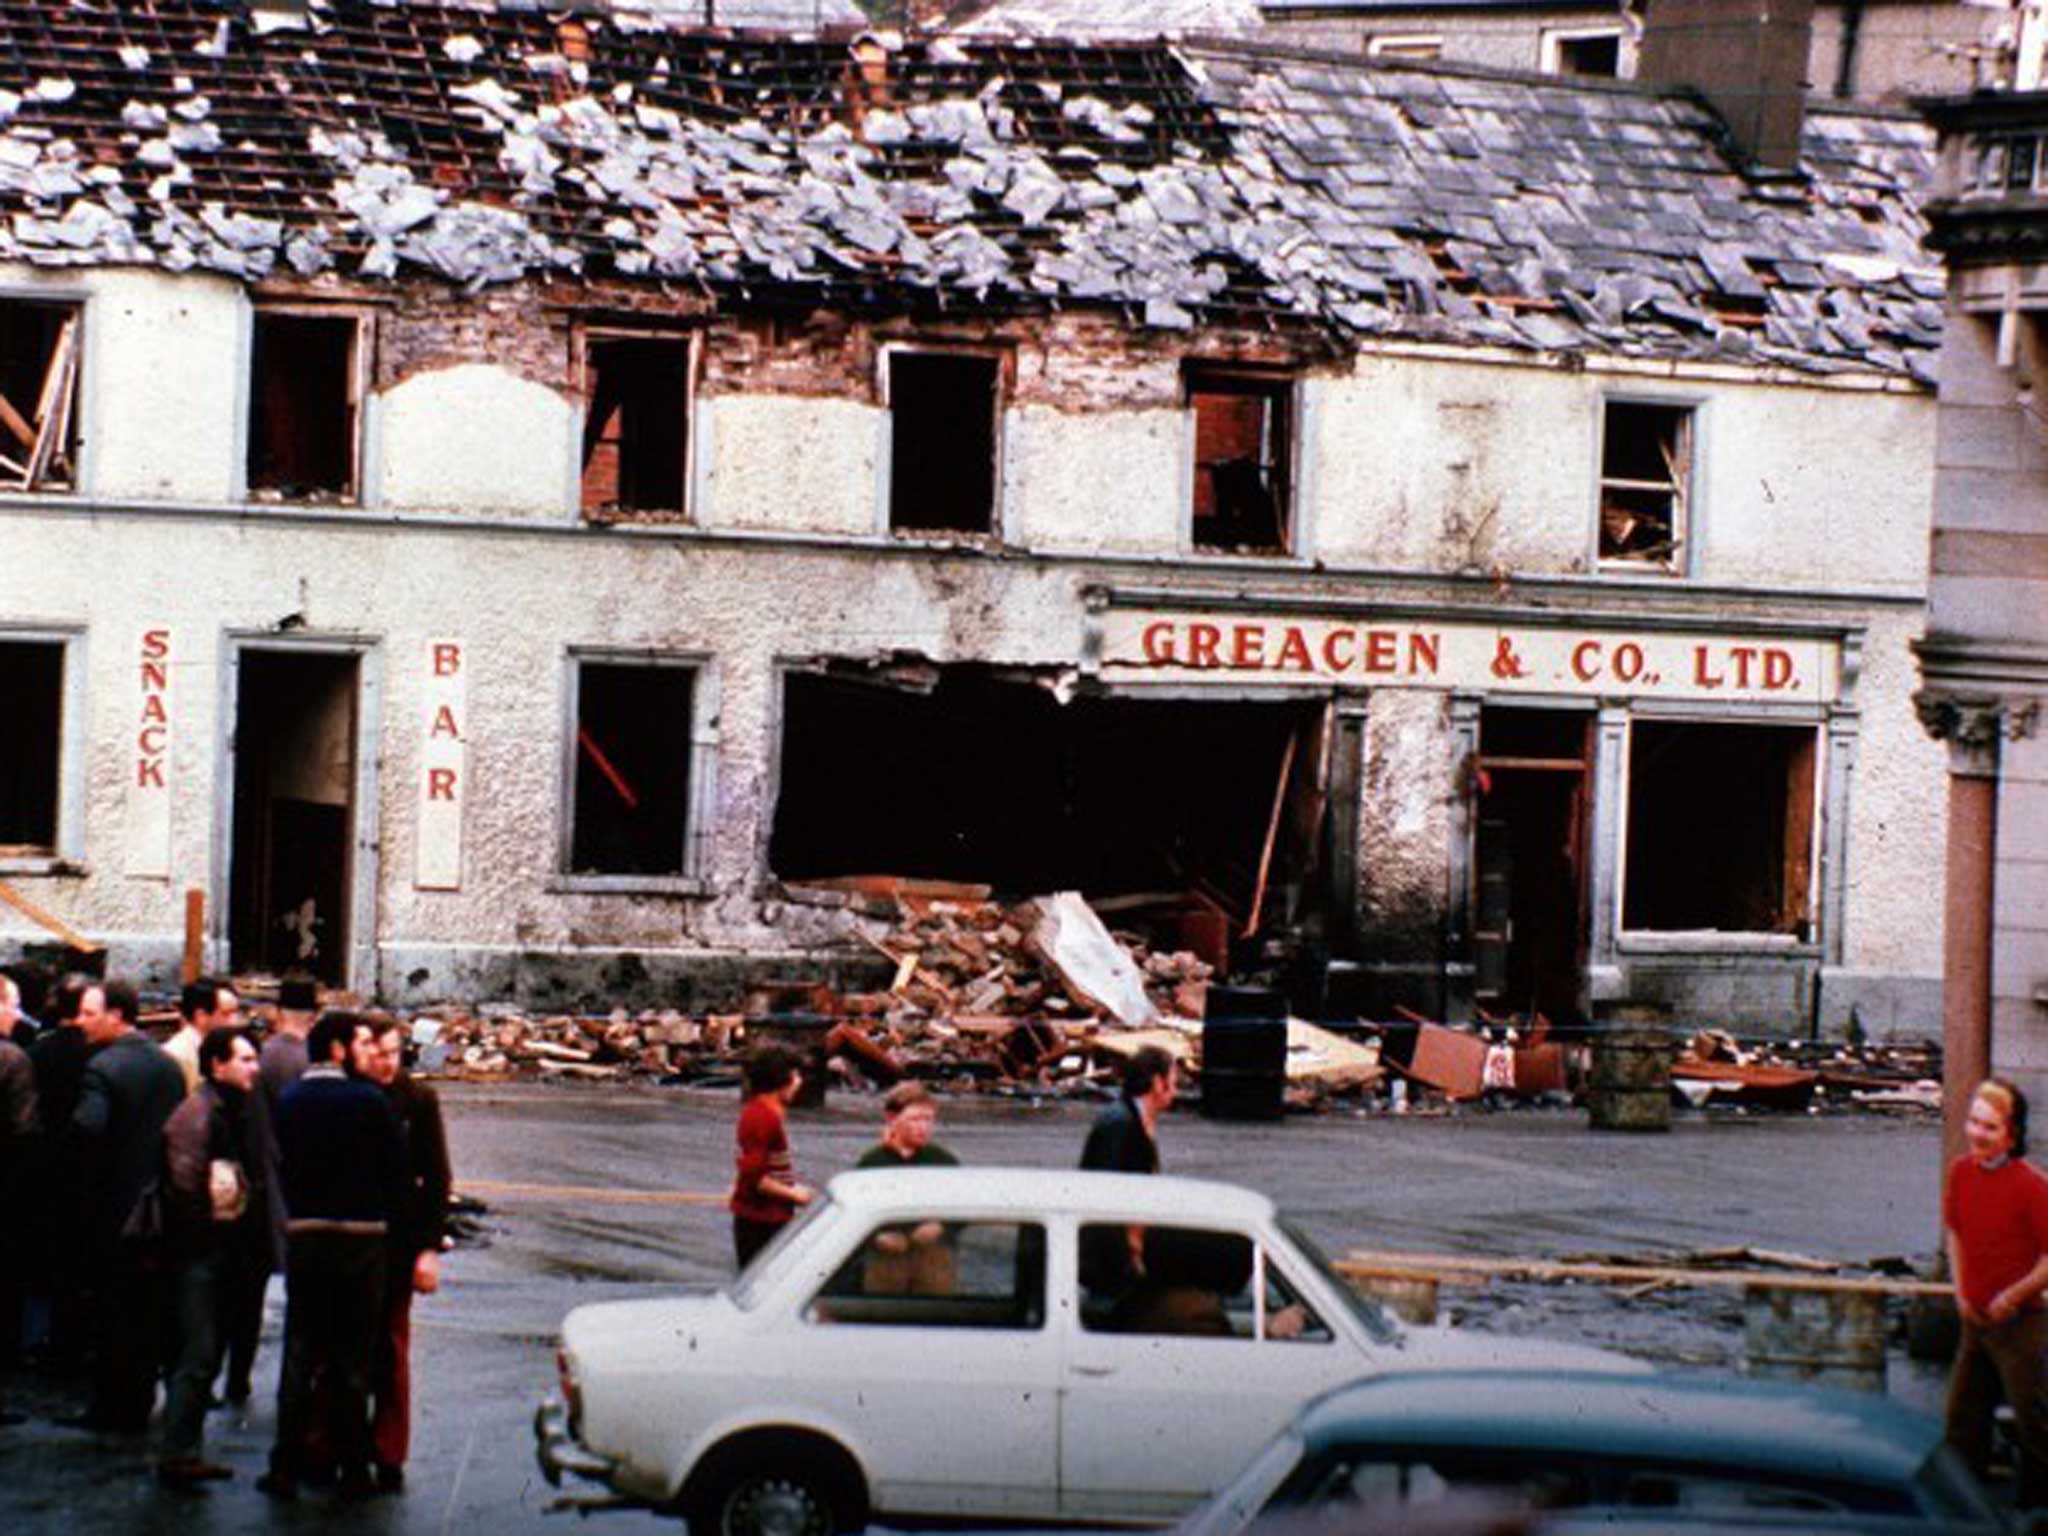 The Monaghan bombing in 1974 which killed seven people, in which police collusion was suspected